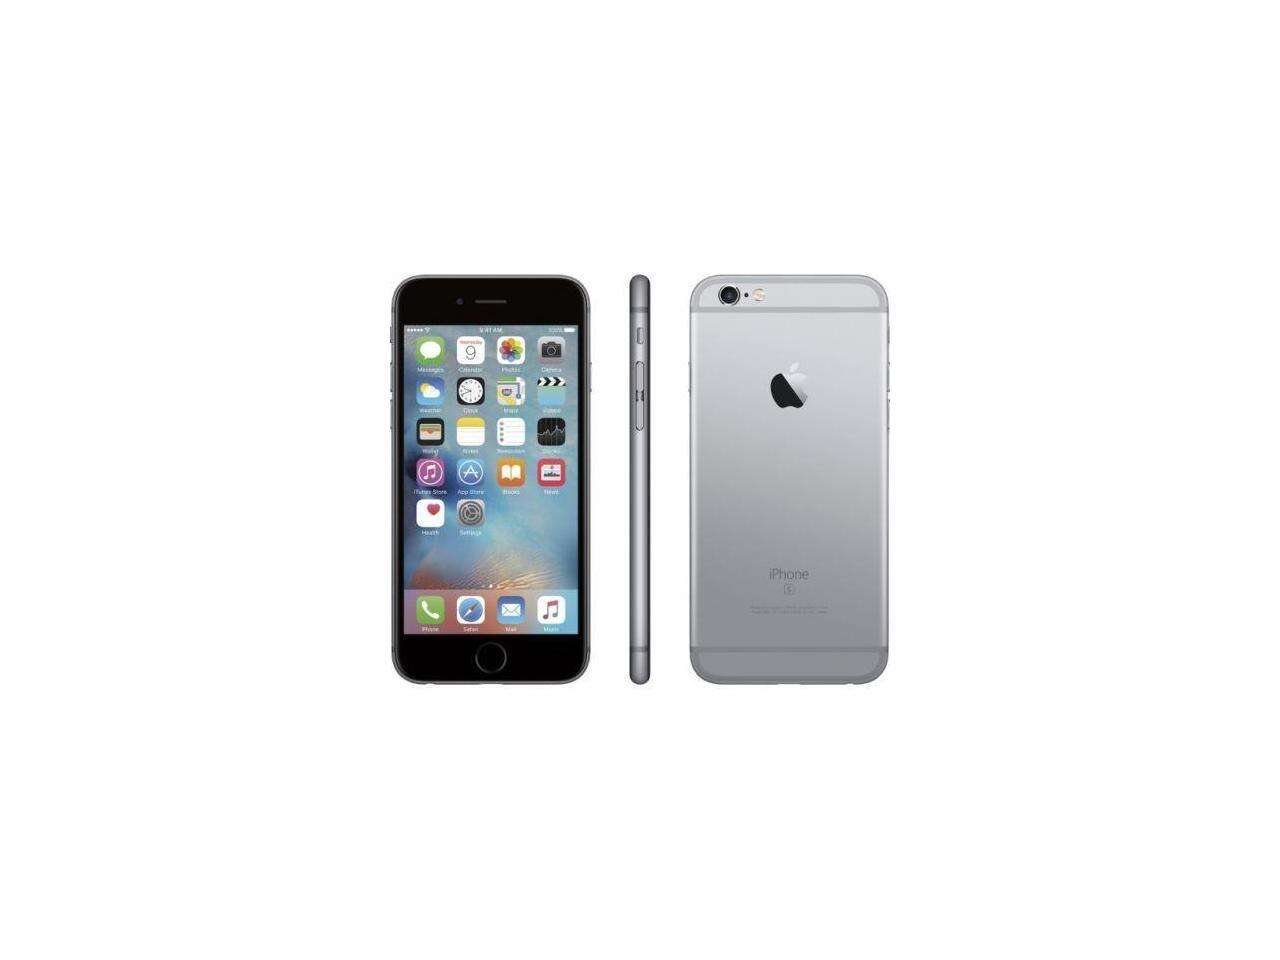 Apple iPhone 6s 16GB Factory GSM Unlocked - Space Gray